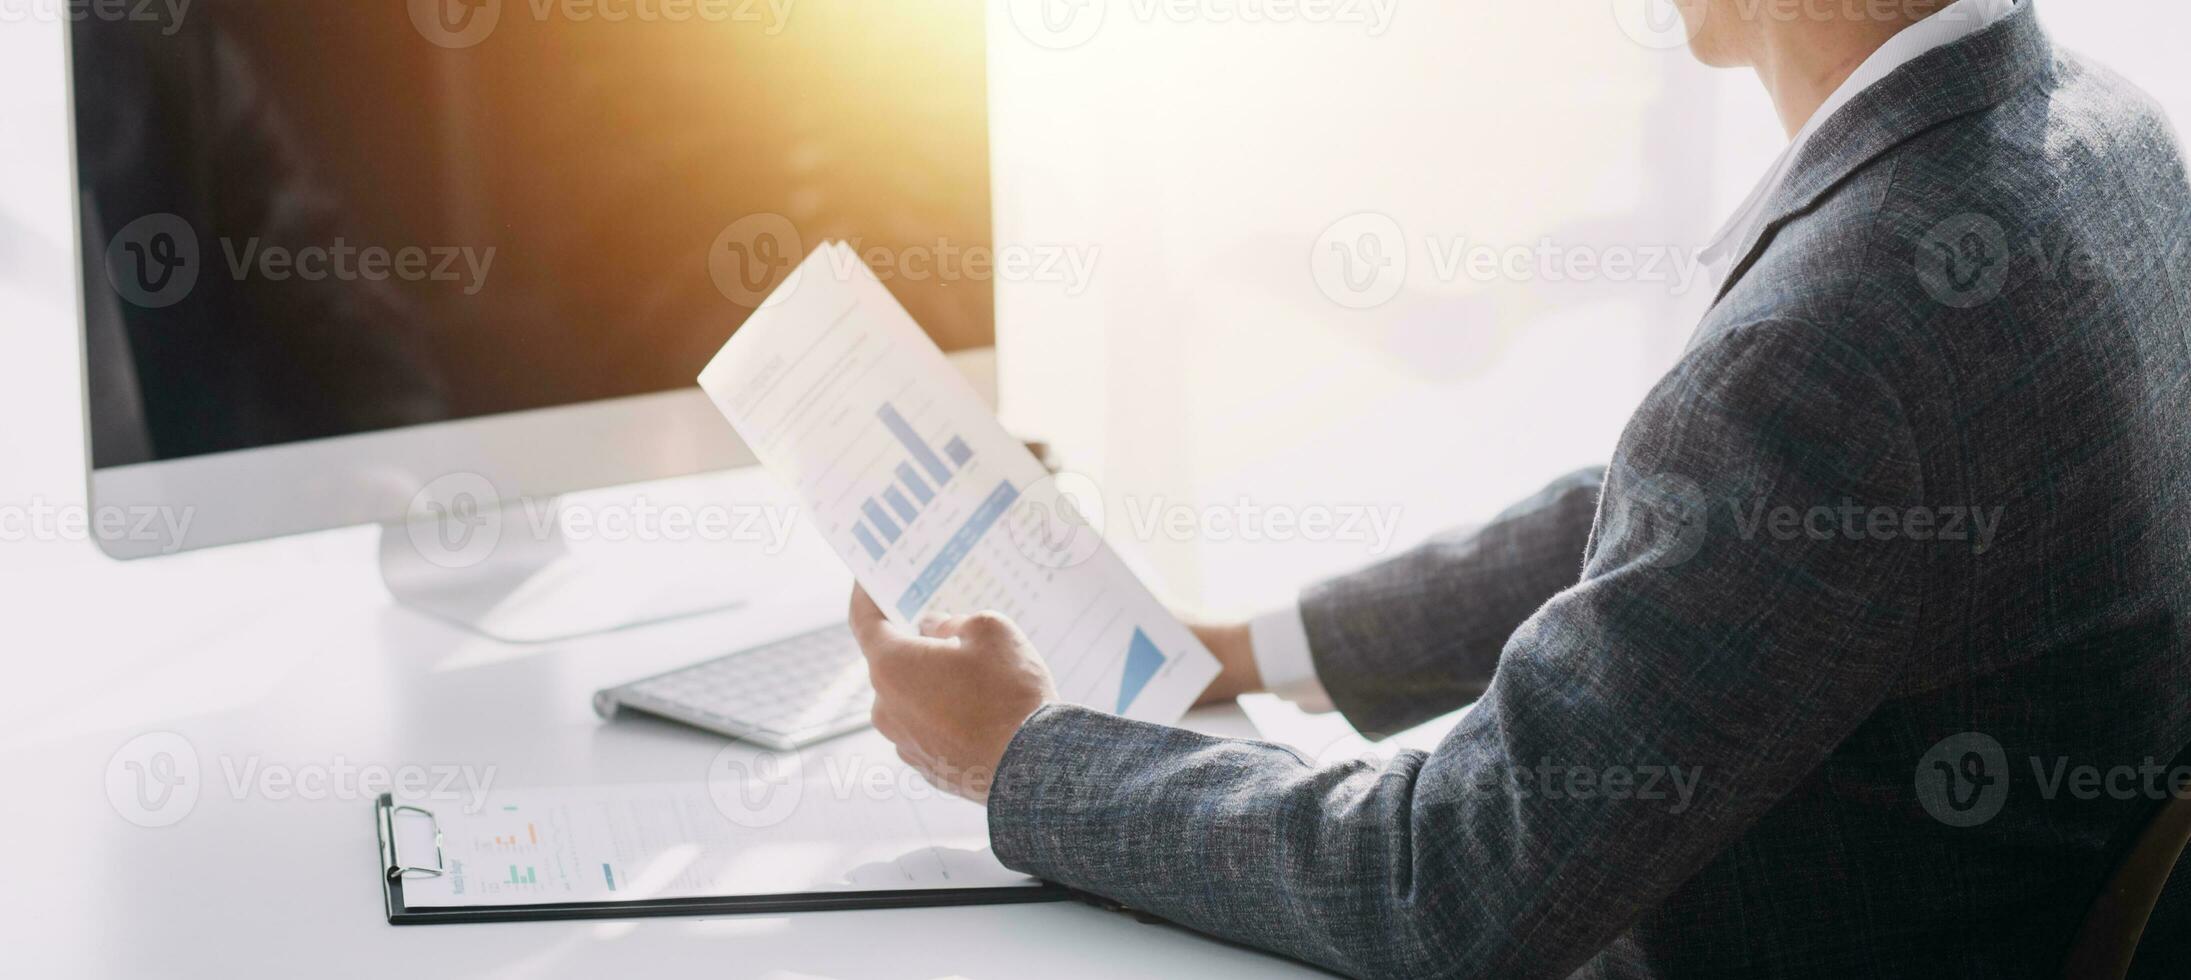 Business Documents, Auditor businesswoman checking searching document legal prepare paperwork or report for analysis TAX time,accountant Documents data contract partner deal in workplace office photo